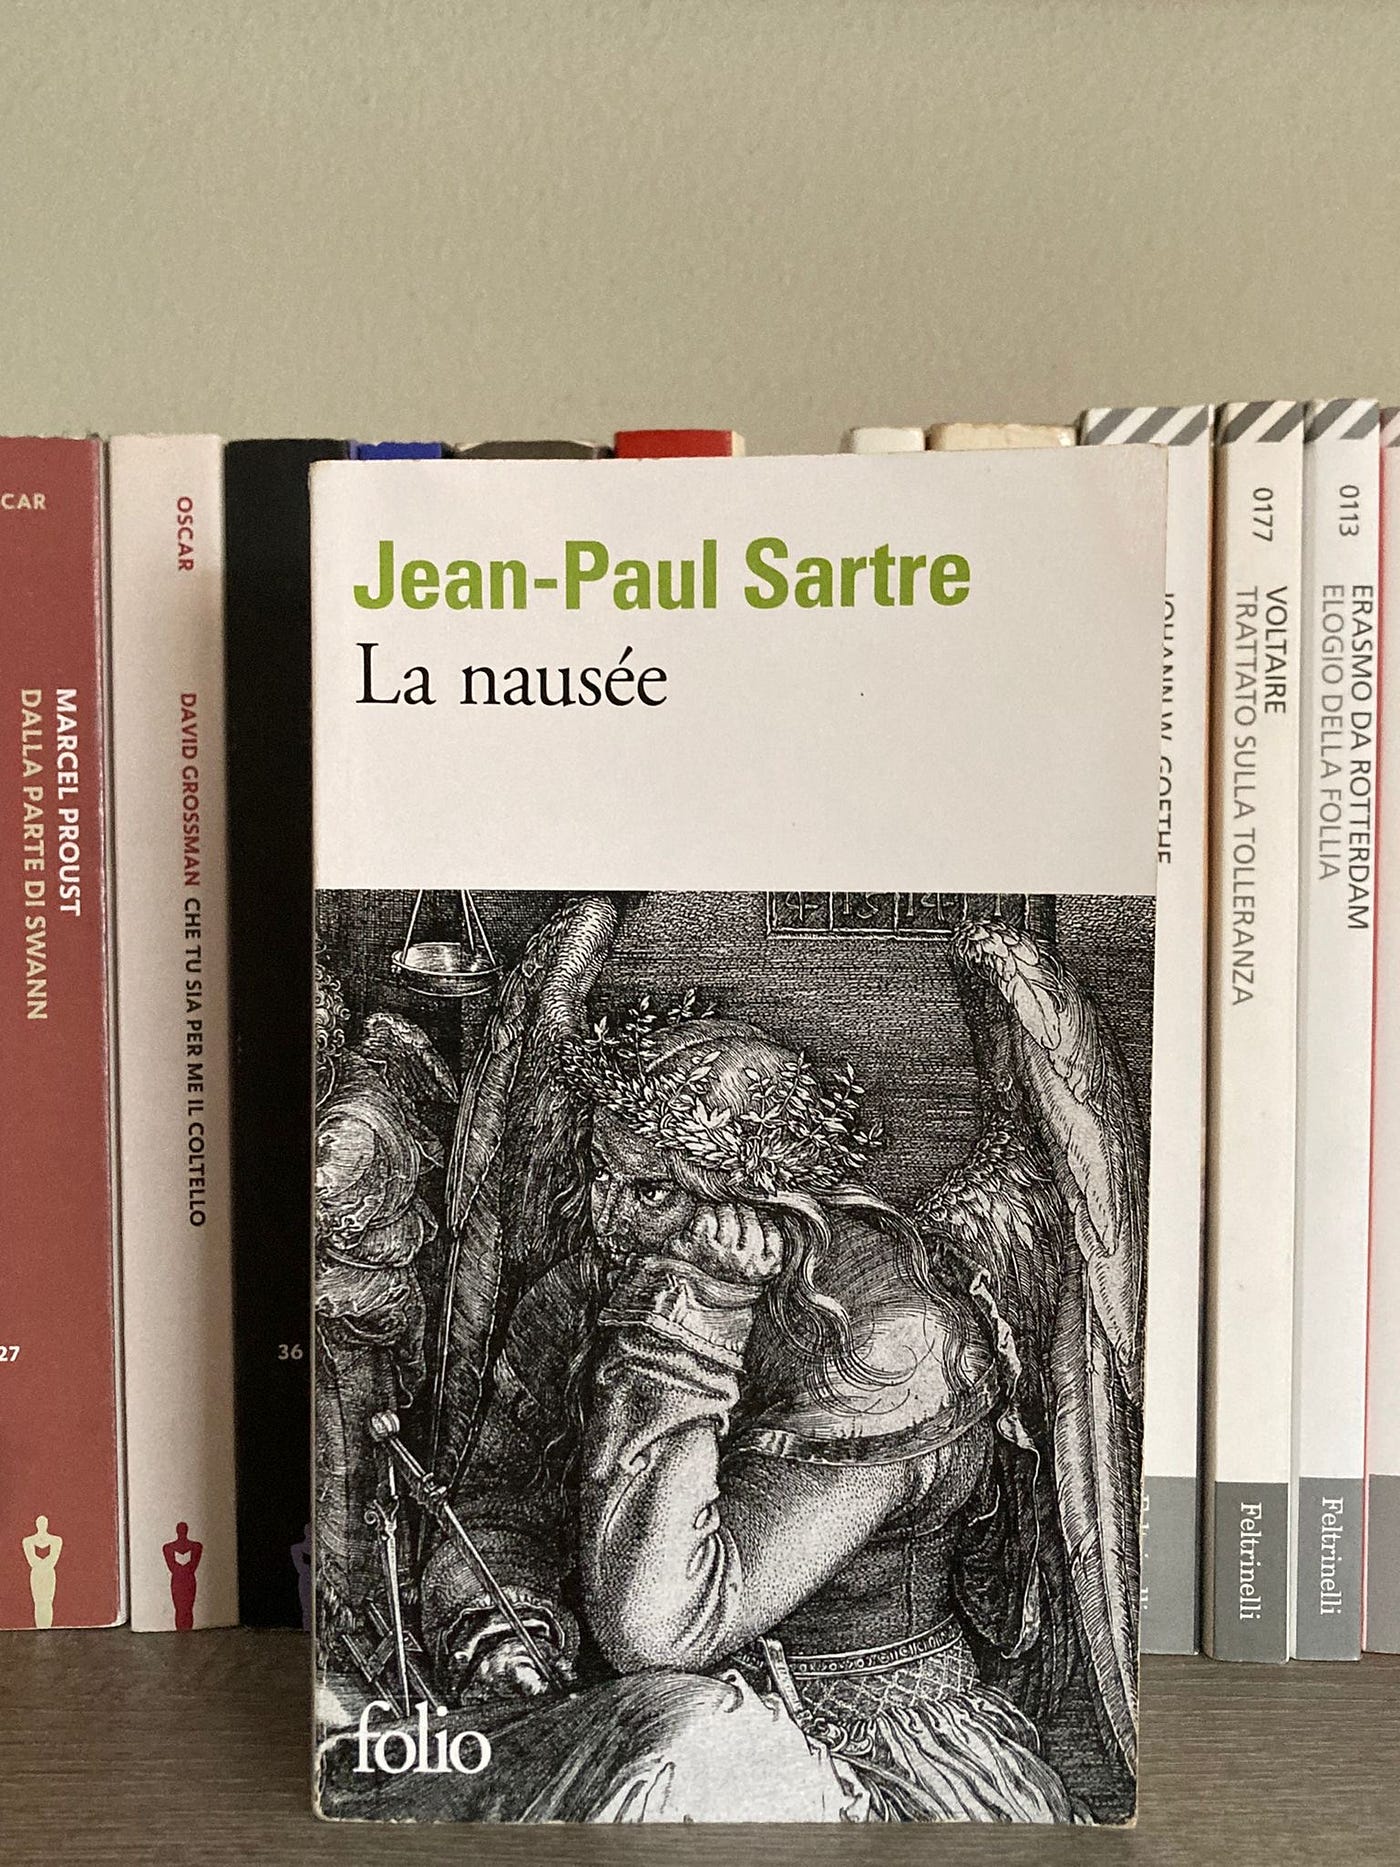 Nausea by Jean-Paul Sartre.. Contrasting opinions, heavy criticism… | by  The Reviewers | Medium